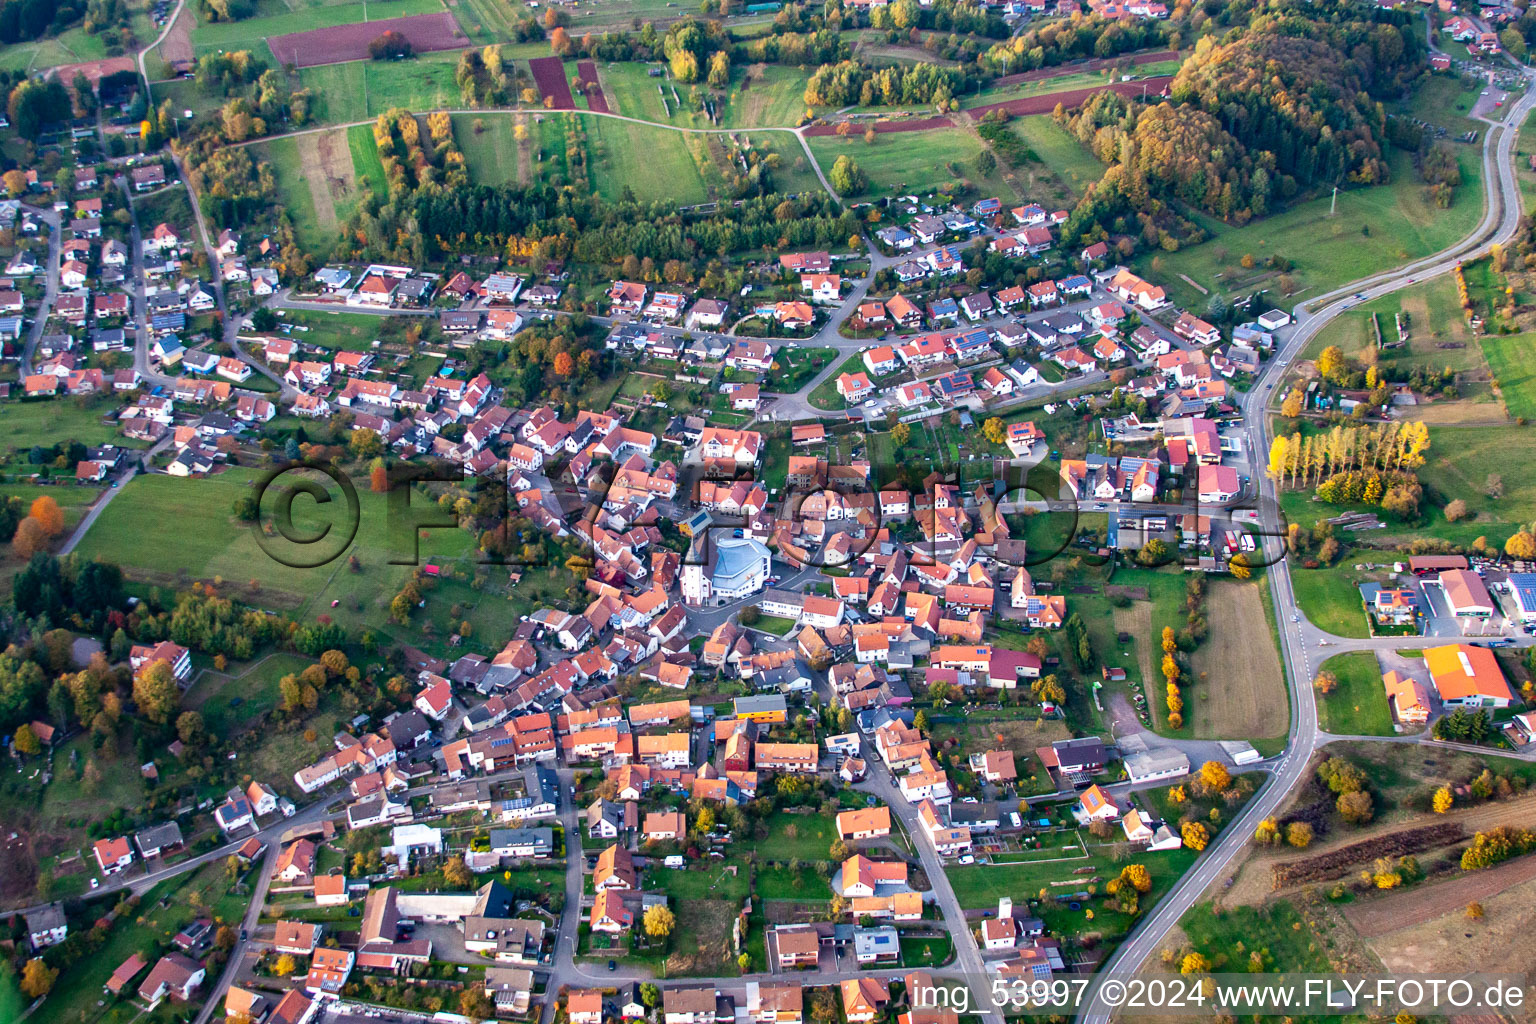 Aerial view of From the south in the district Gossersweiler in Gossersweiler-Stein in the state Rhineland-Palatinate, Germany